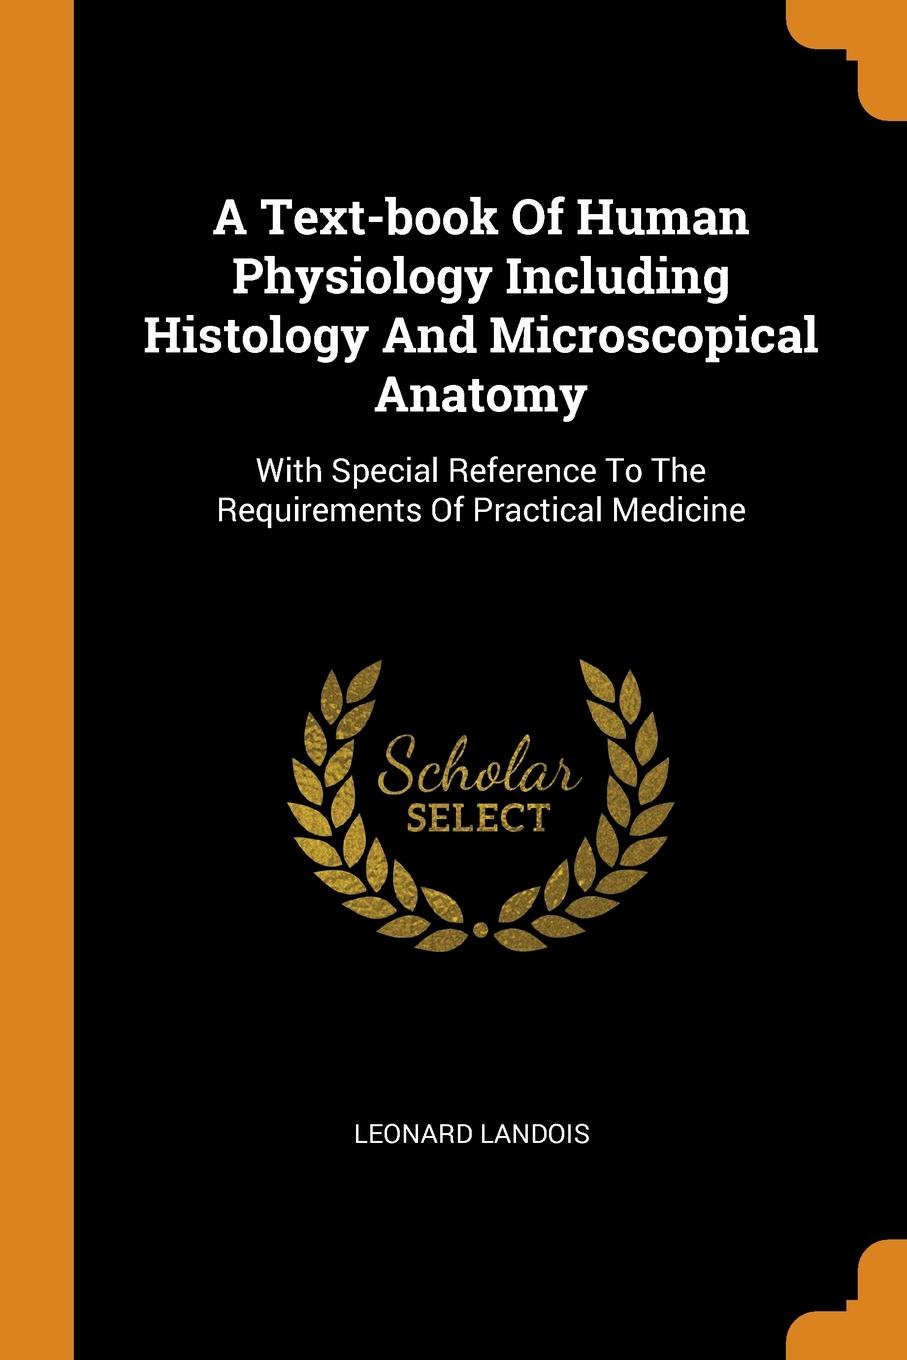 A Text-book Of Human Physiology Including Histology And Microscopical Anatomy. With Special Reference To The Requirements Of Practical Medicine